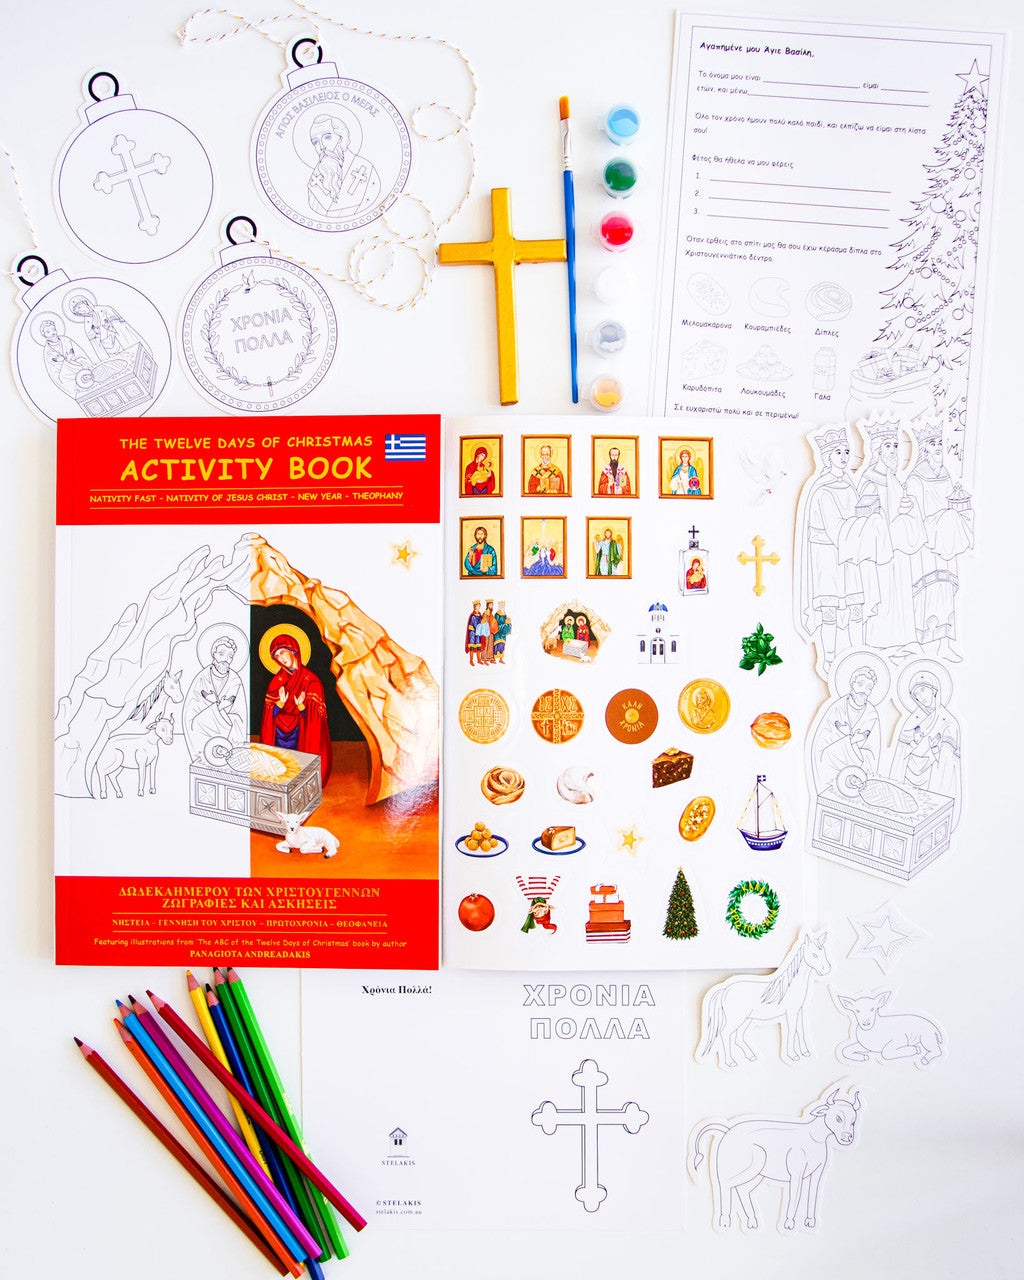 The Twelve Days of Christmas Activity Book